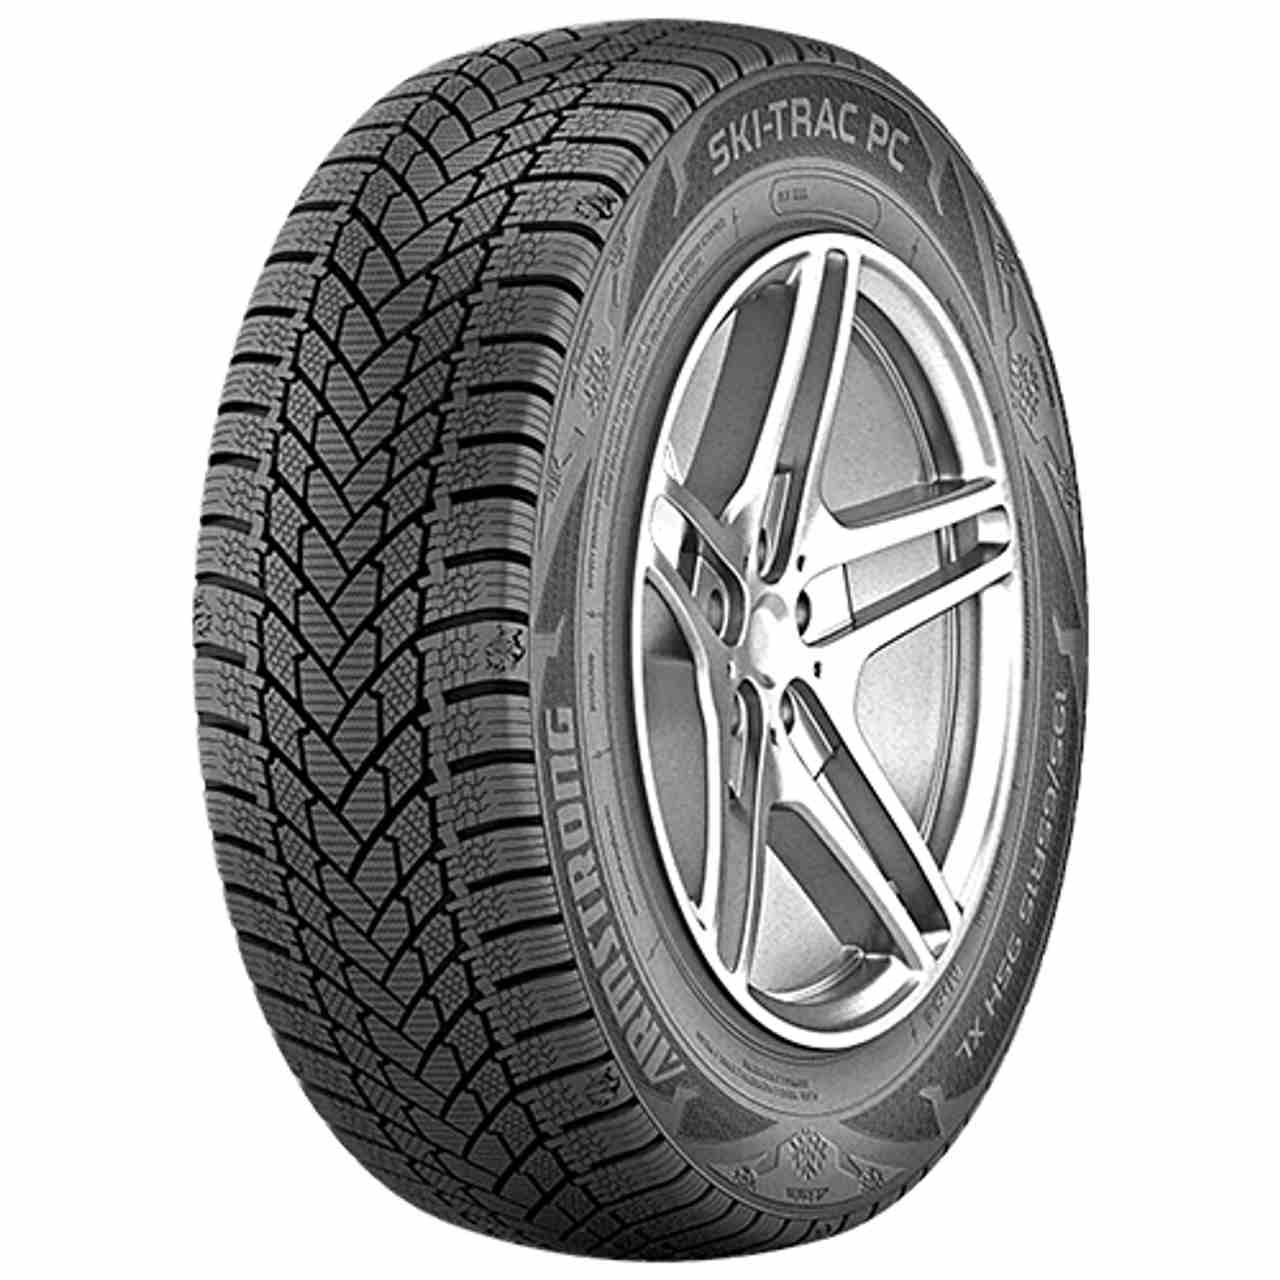 ARMSTRONG SKI-TRAC PC 185/60R14 82T BSW